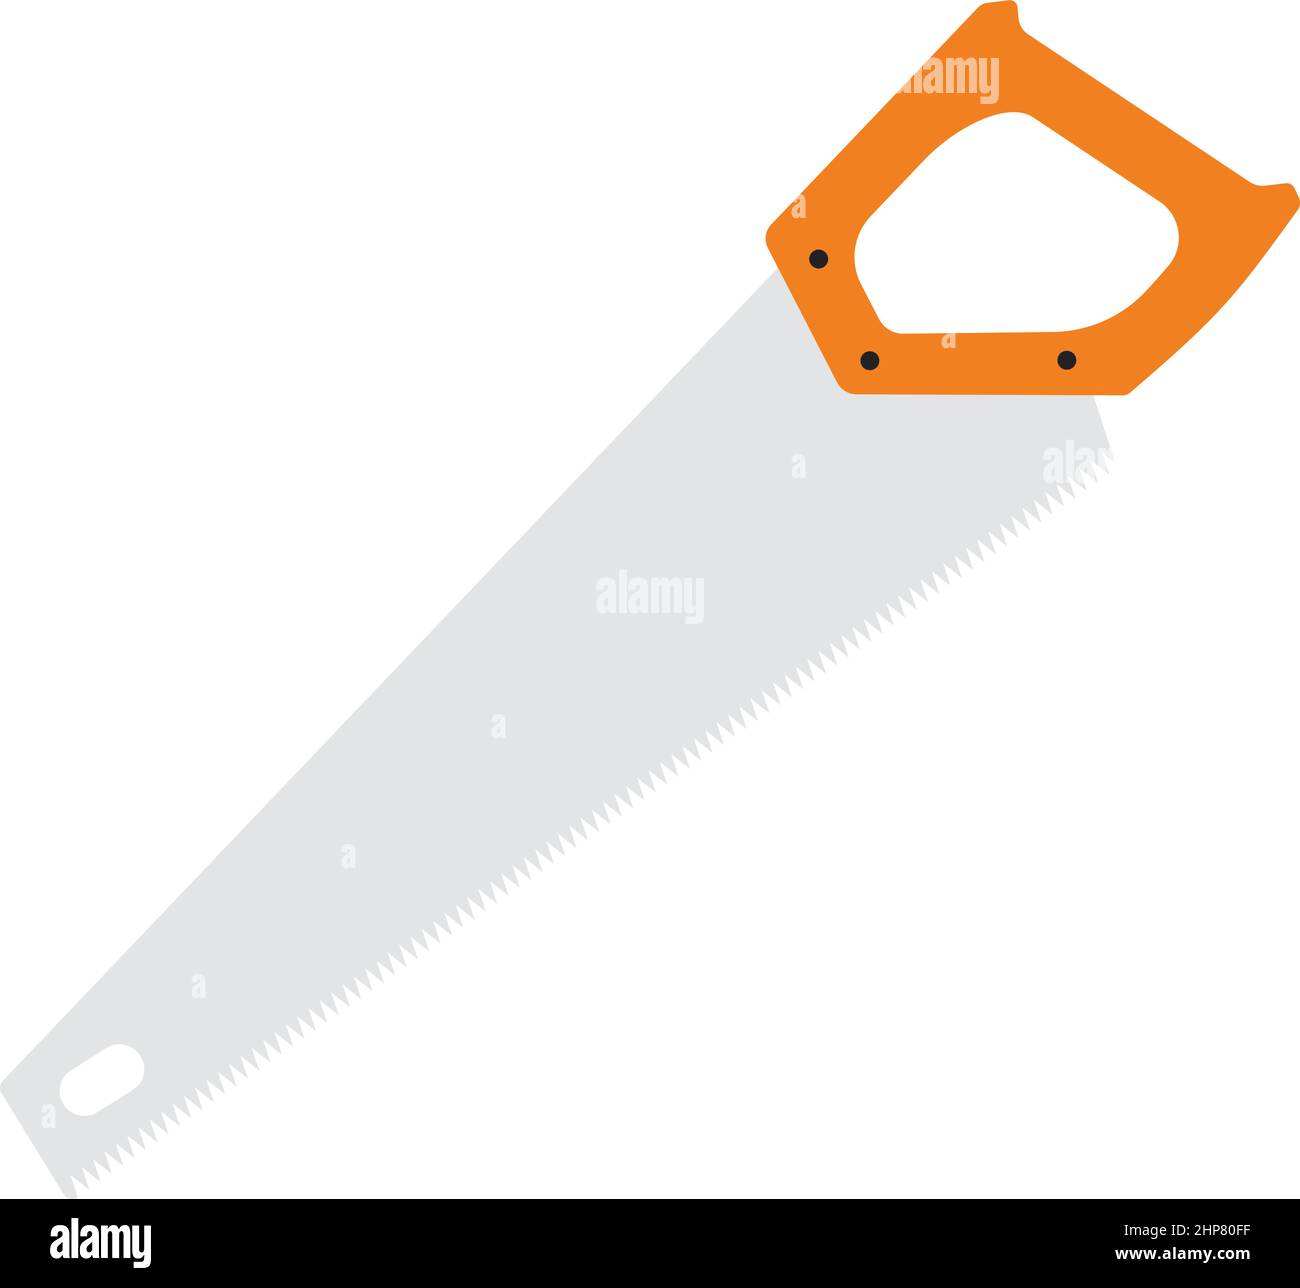 Icon Of Hand Saw Stock Vector